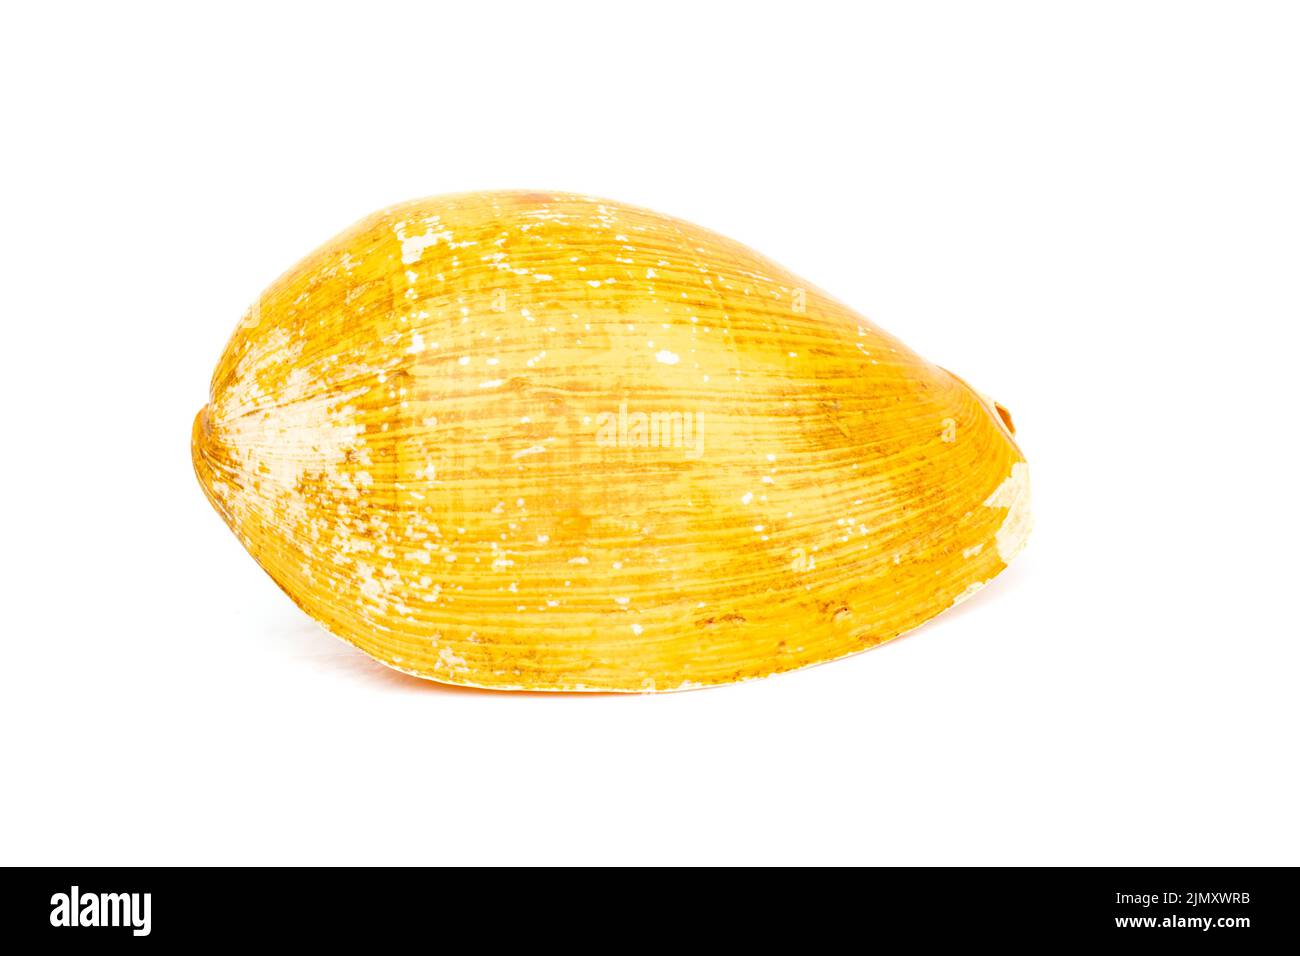 Image of yellow shell on a white background. Undersea Animals. Sea Shells. Stock Photo